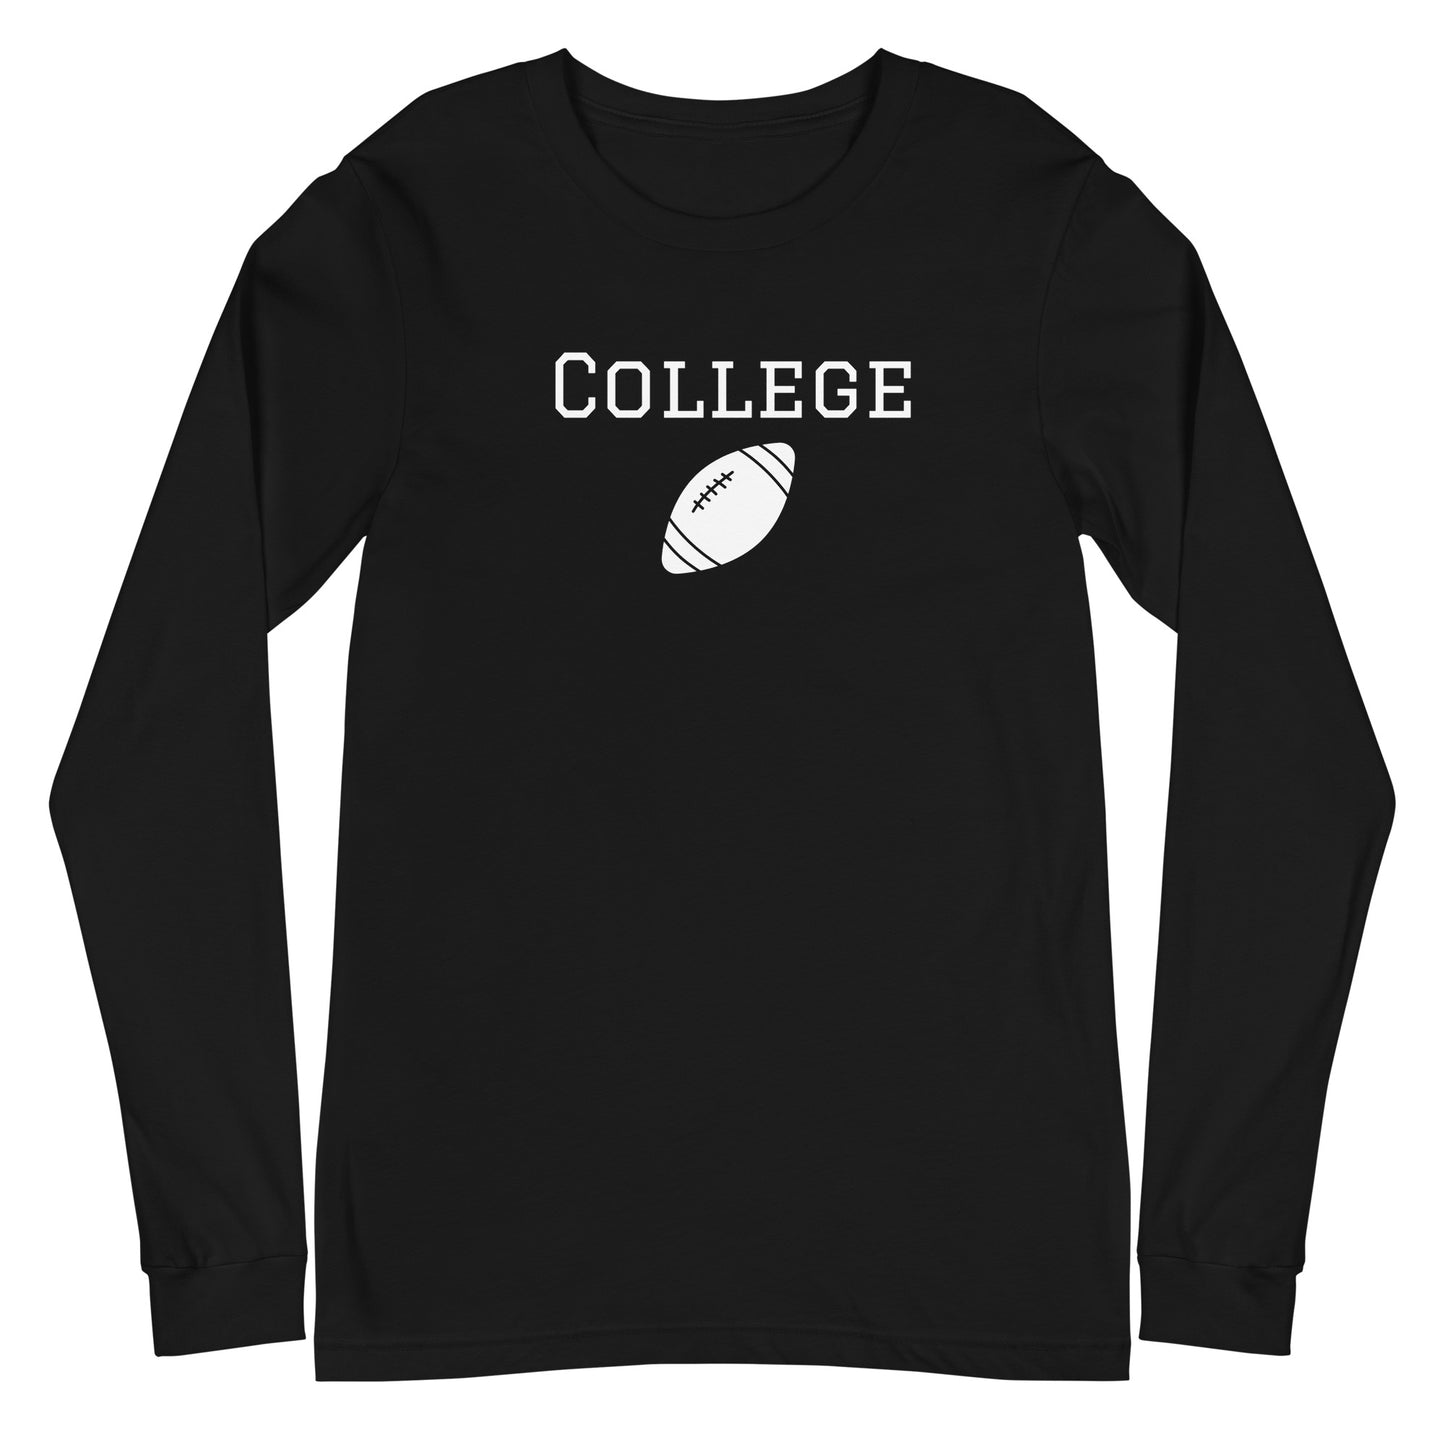 Black long sleeve tee shirt that says 'college' and has a picture of a football 